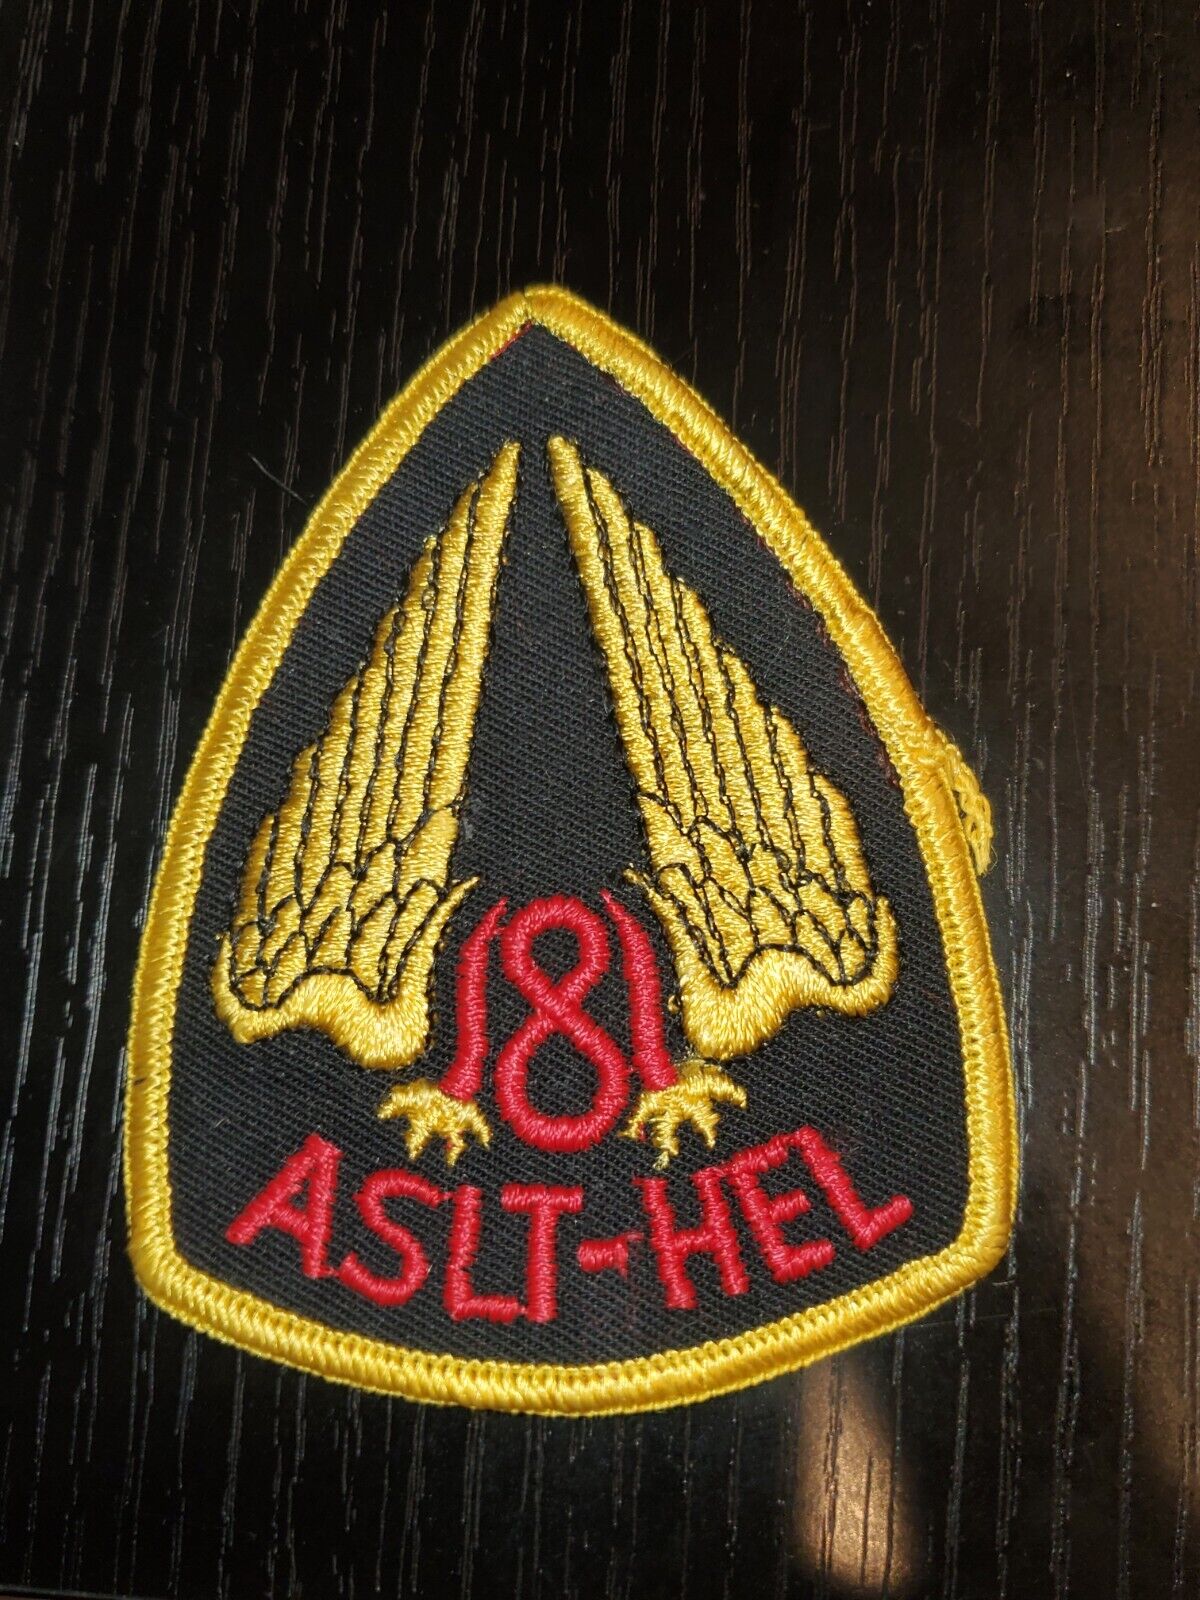 1960s US Army Vietnam Era Cold War 181st Assault Helicopter Company Patch L@@K